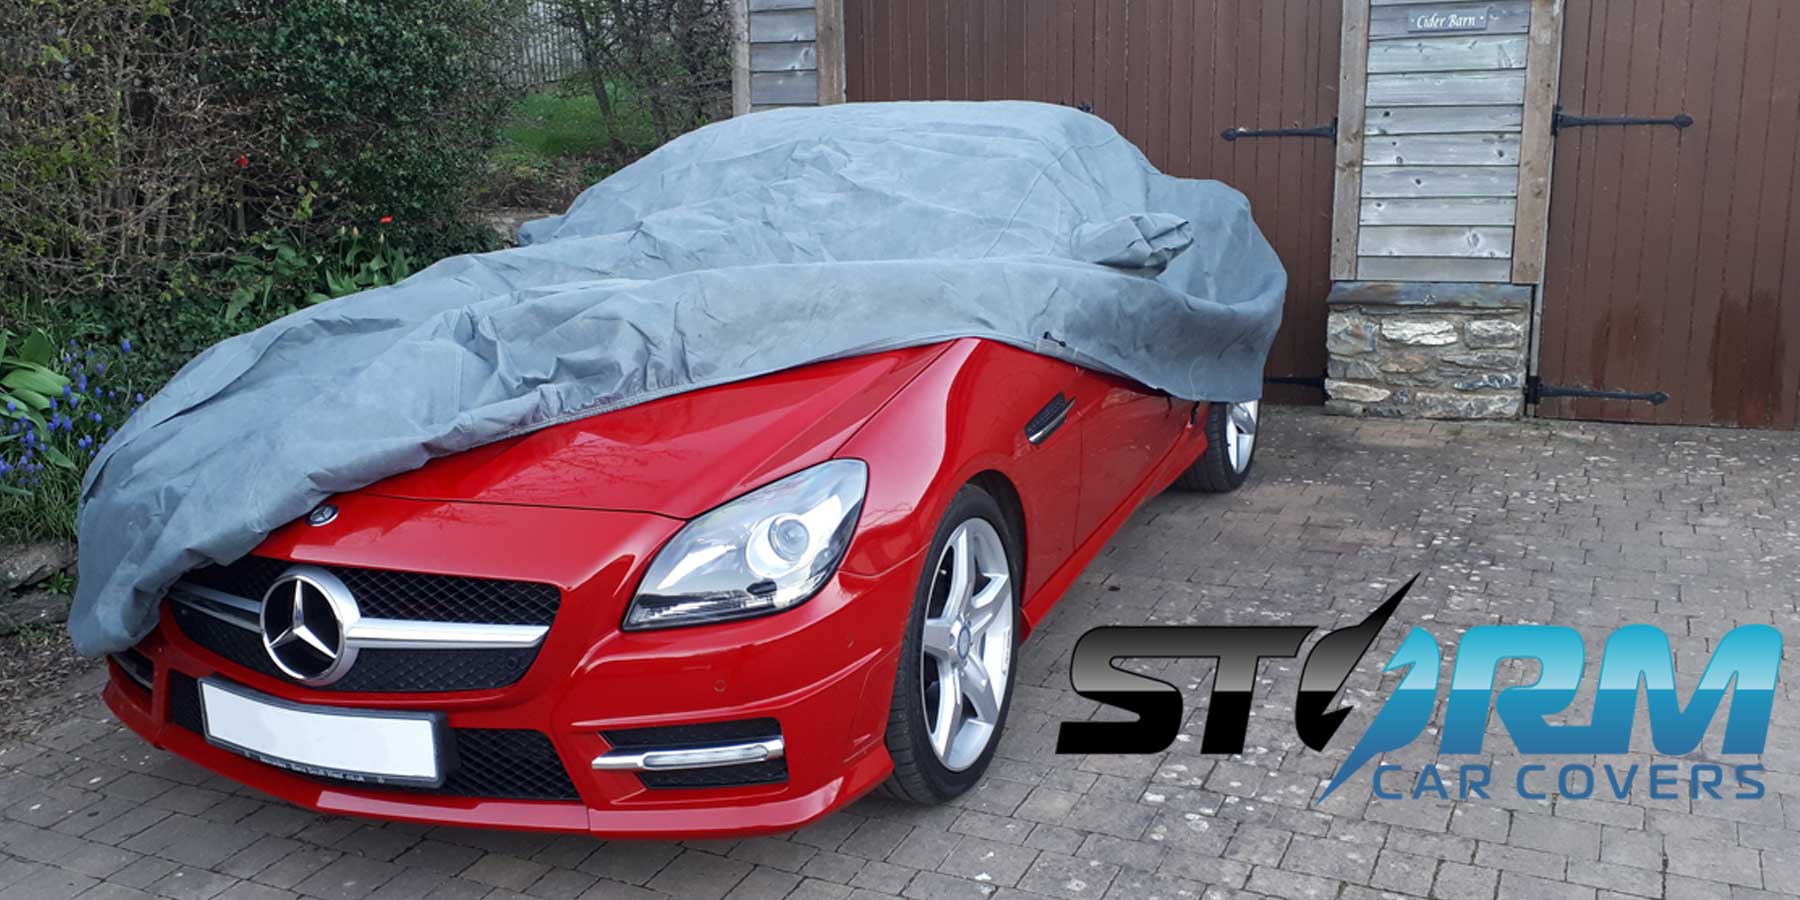 For Mercedes B-Class Sports Tourer Car Cover Outdoor UV Dust Water Resistant